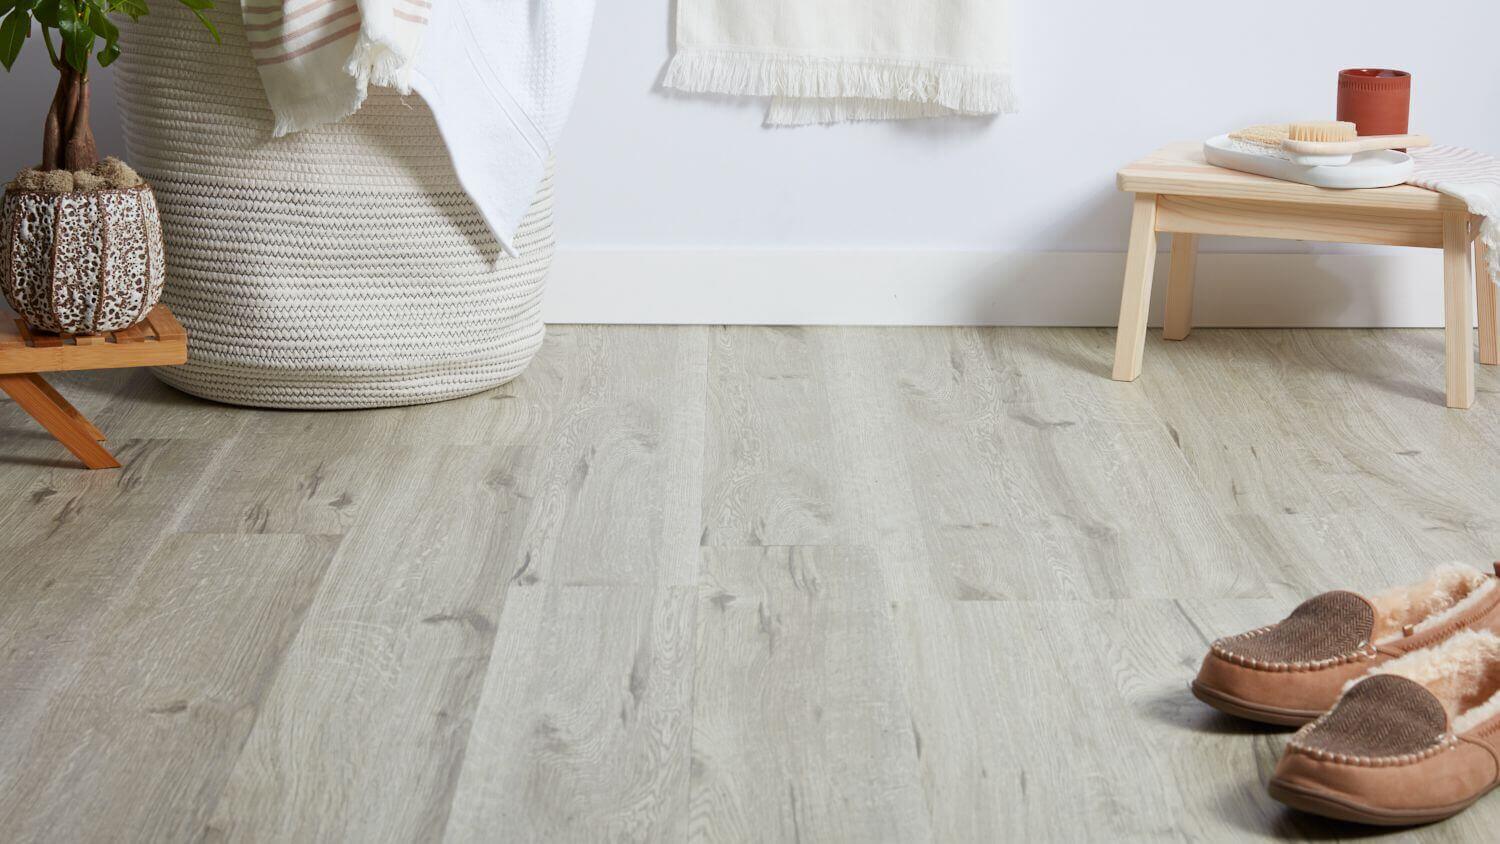 Different Types of Vinyl Flooring for Your Home